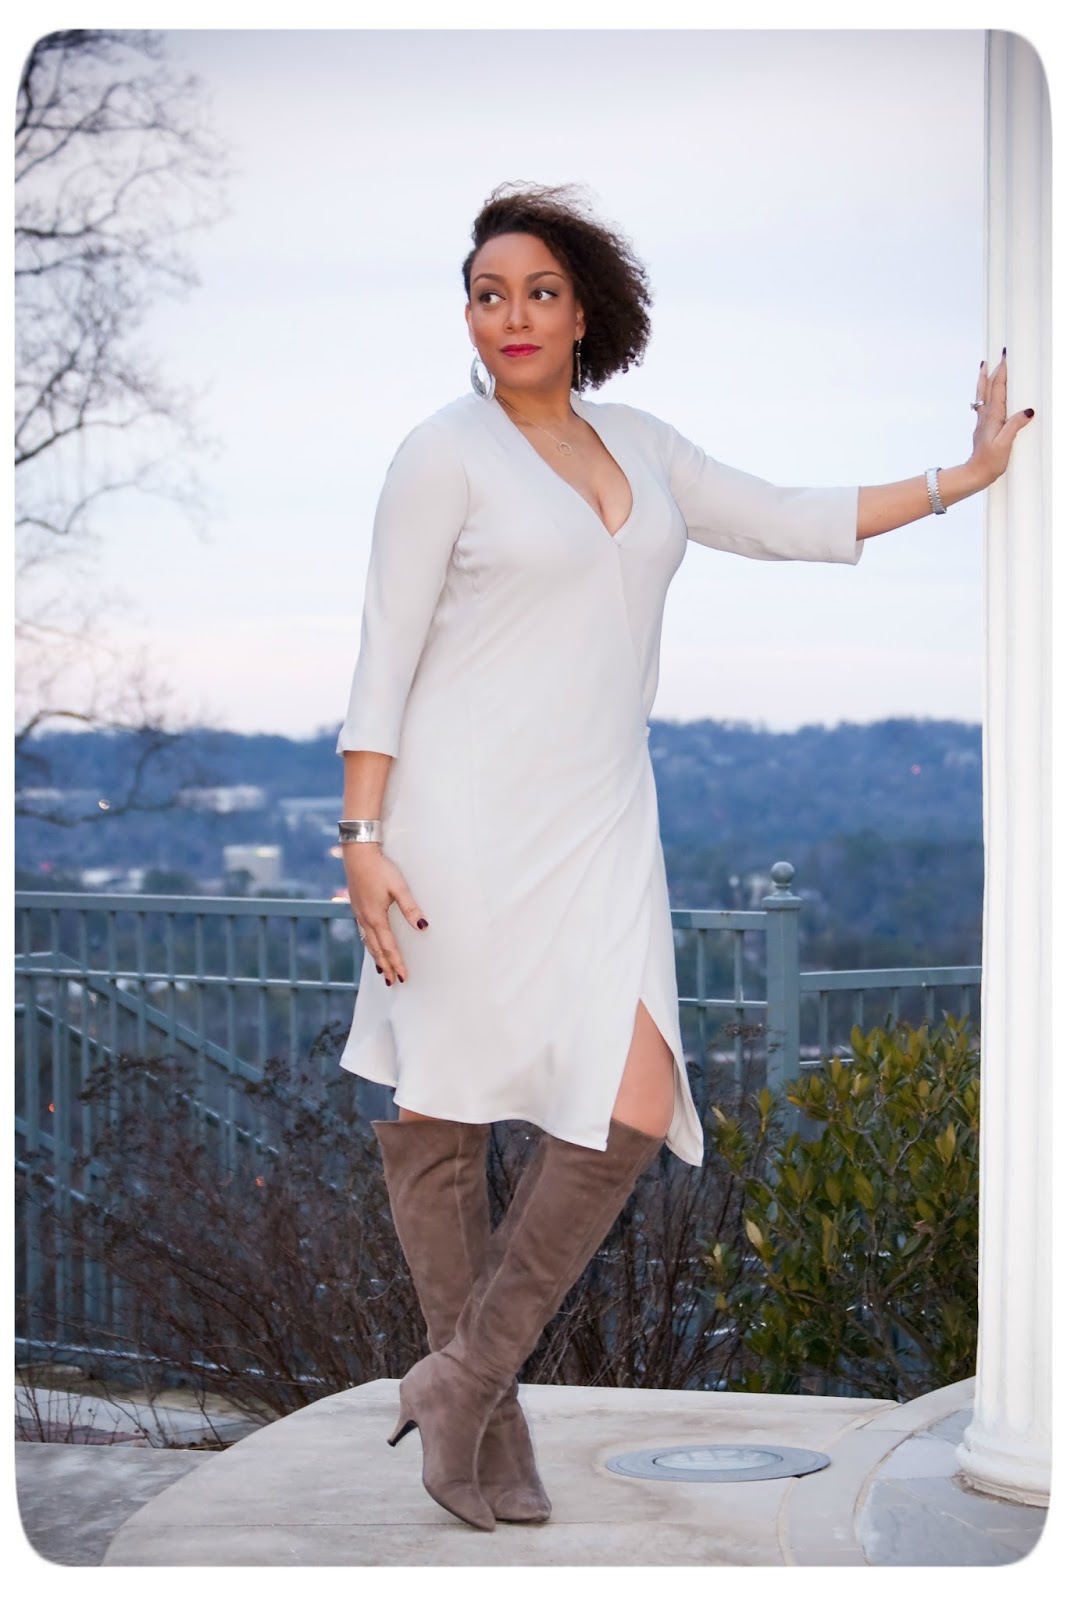 Review: Vogue 1384 | Shades of Grey Silk Georgette Dress! - Erica B.'s DIY Style!